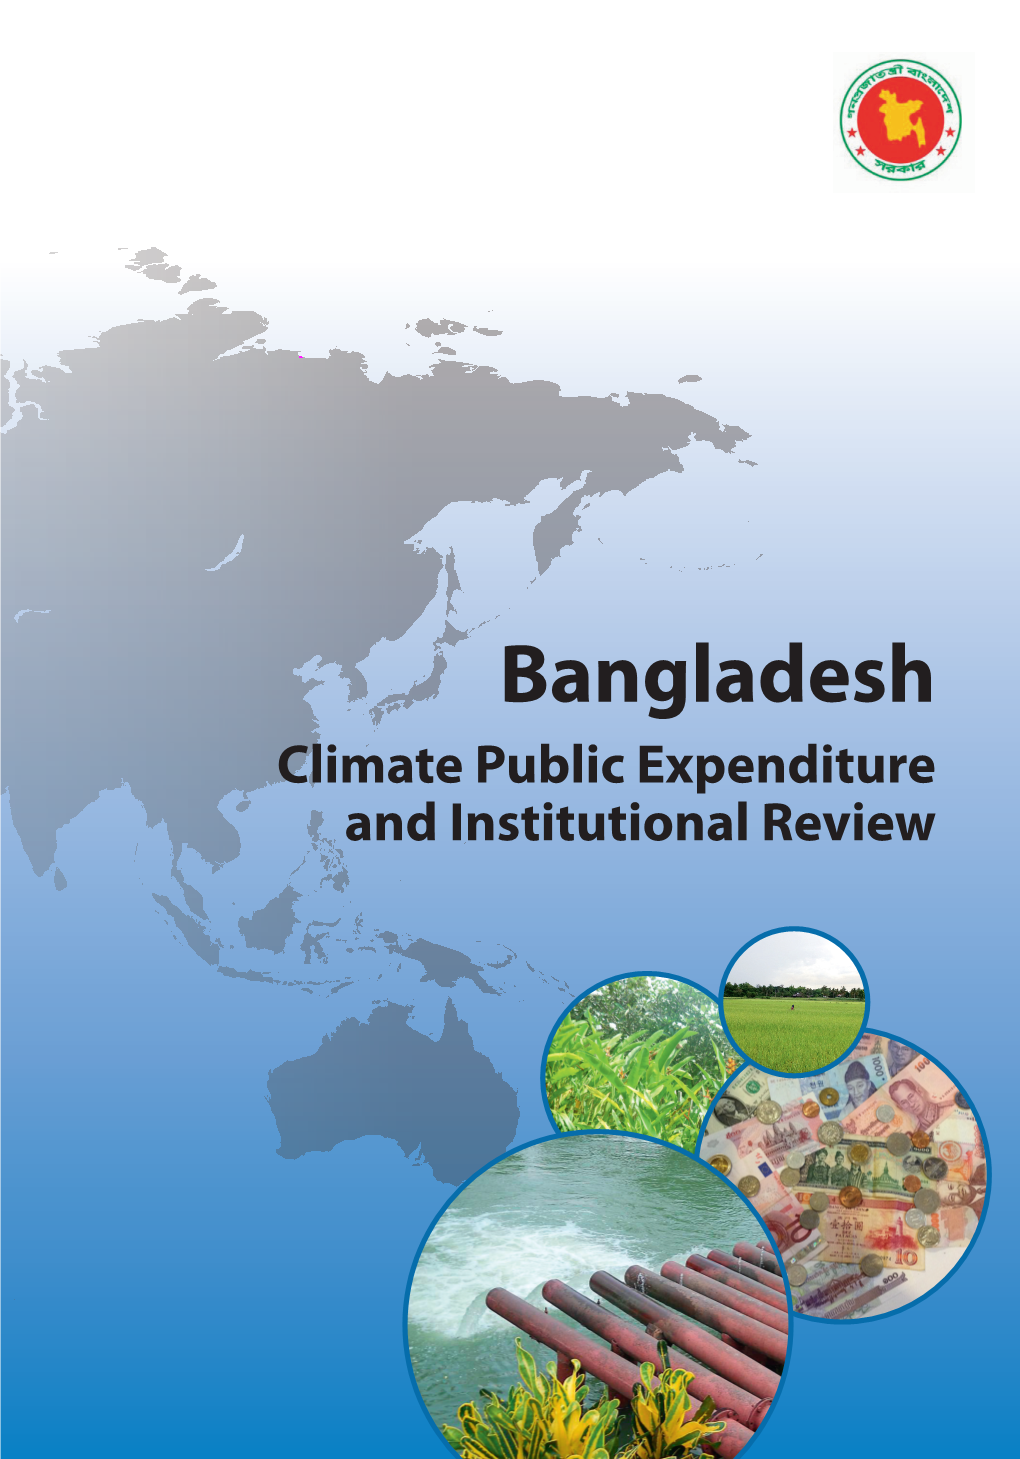 Bangladesh Climate Public Expenditures and Institutions Review